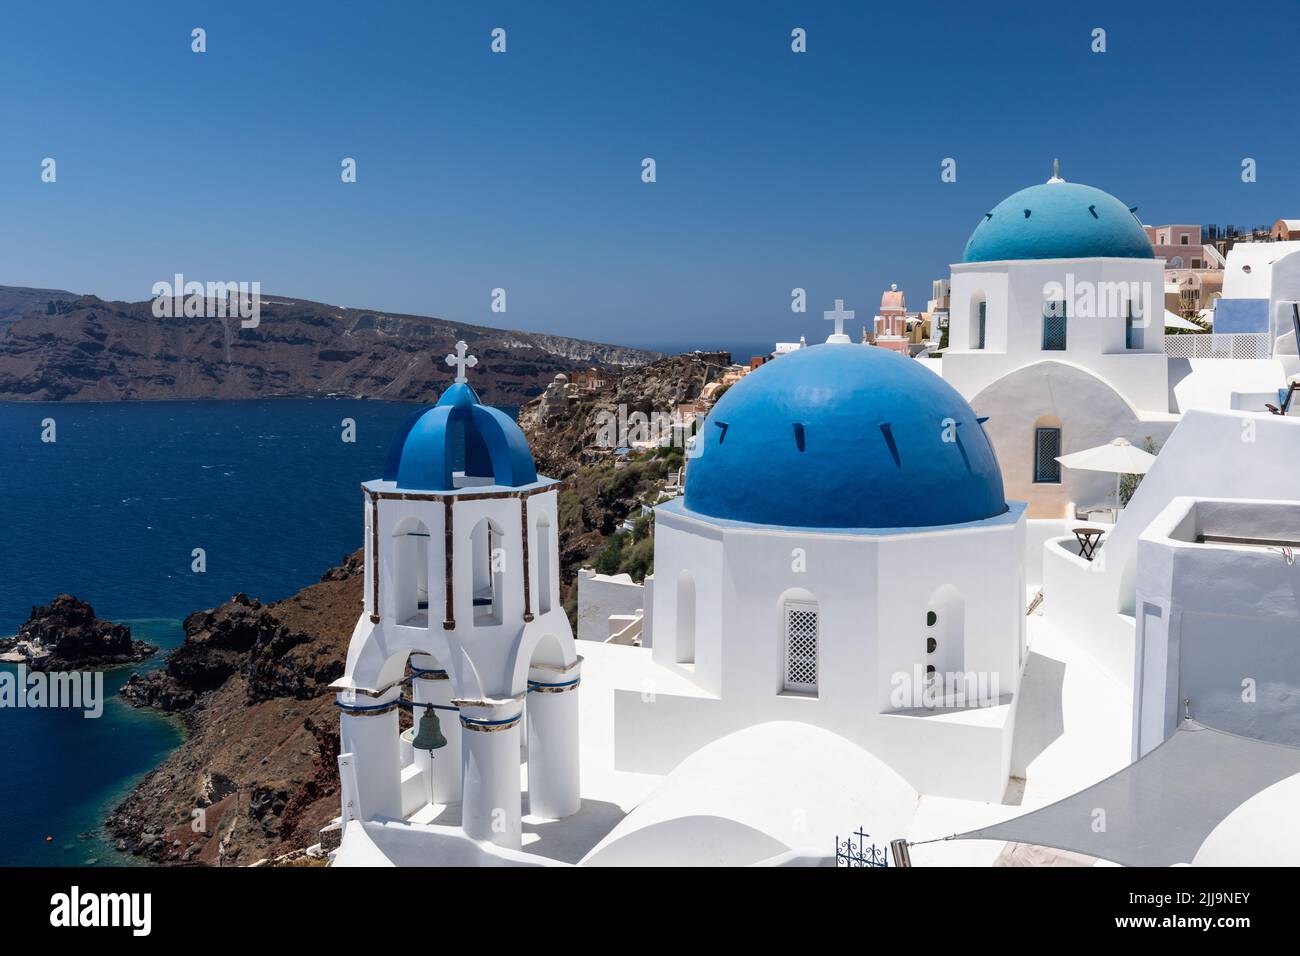 The famous iconic landmark Blue Domes of Oia are situated on the edge of the Caldera in Oia, Santorini, Cyclades islands, Greece, Europe Stock Photo